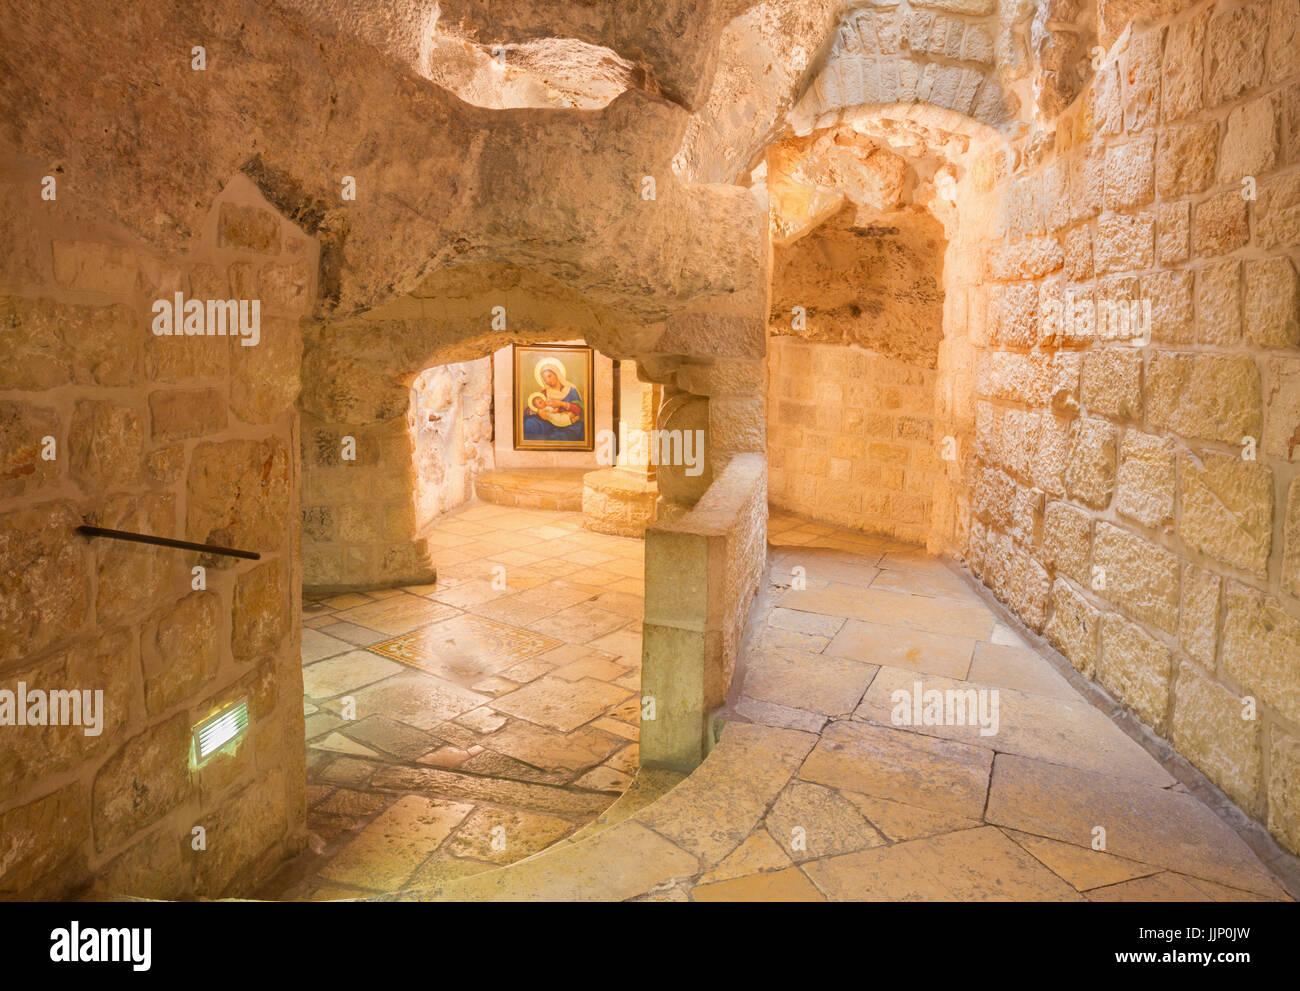 BETHLEHEM, ISRAEL - MARCH 6, 2015: The cave of 'Milk Grotto' chapel. Stock Photo